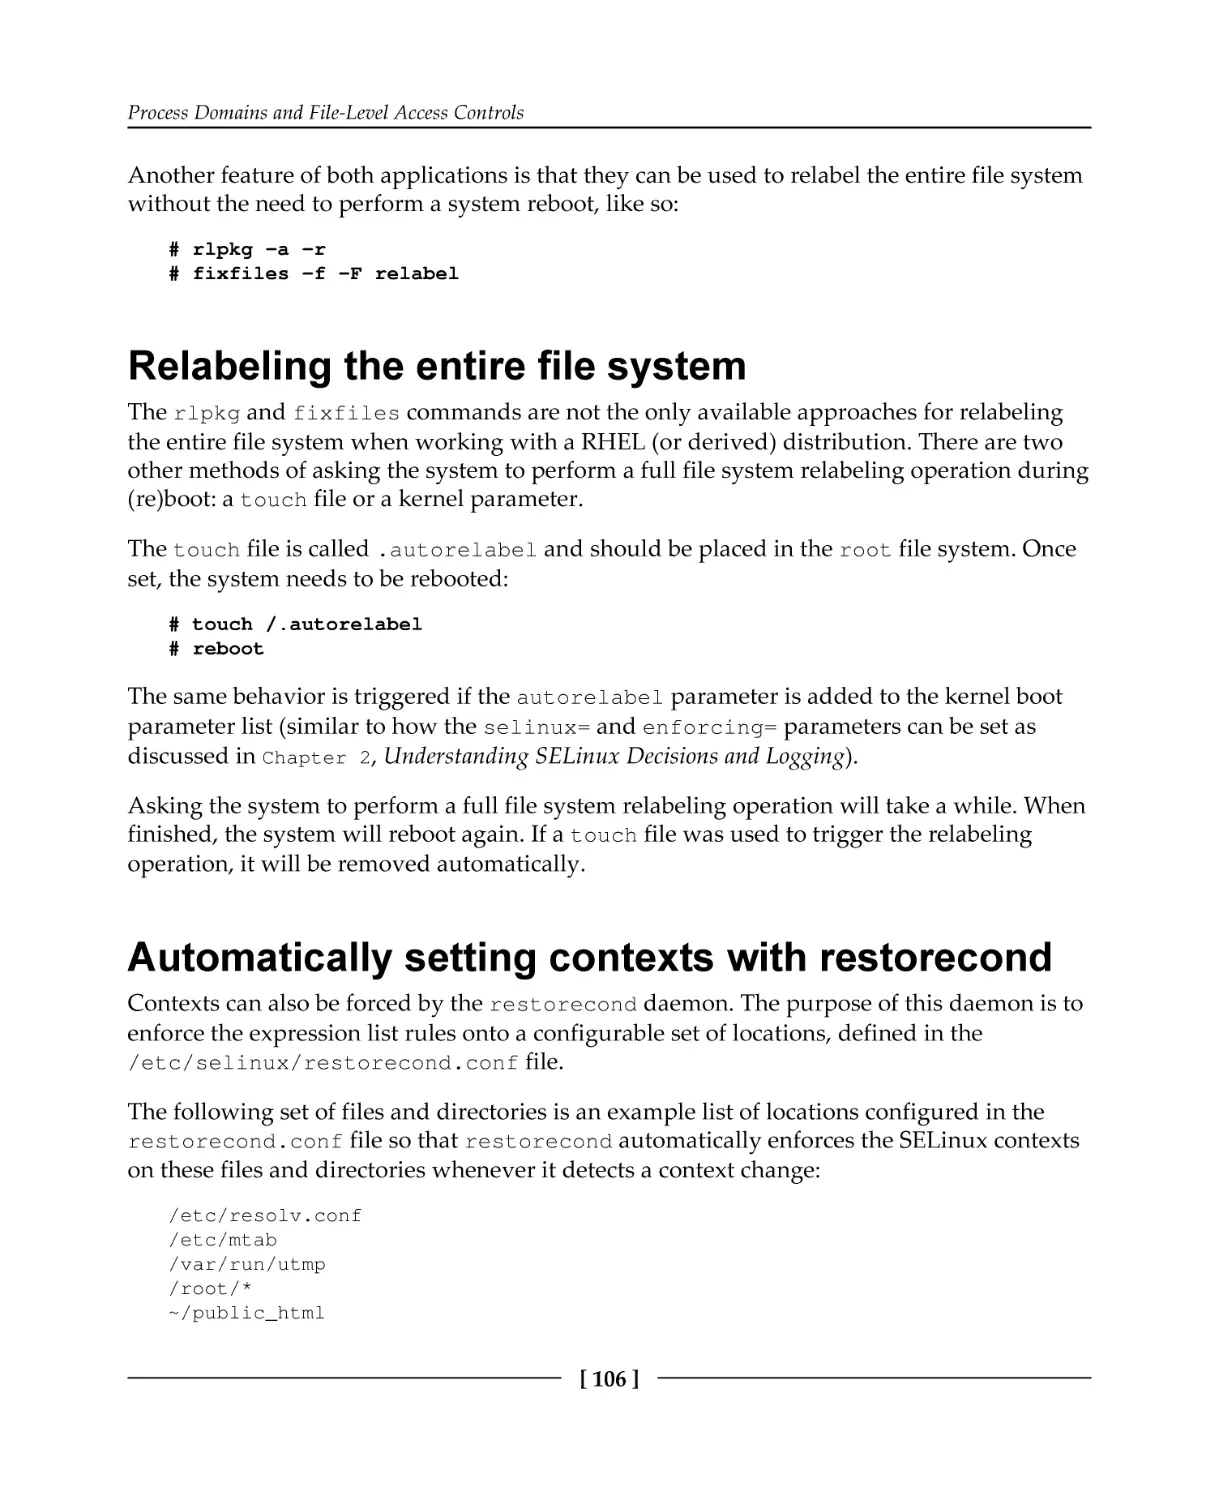 Relabeling the entire file system
Automatically setting contexts with restorecond